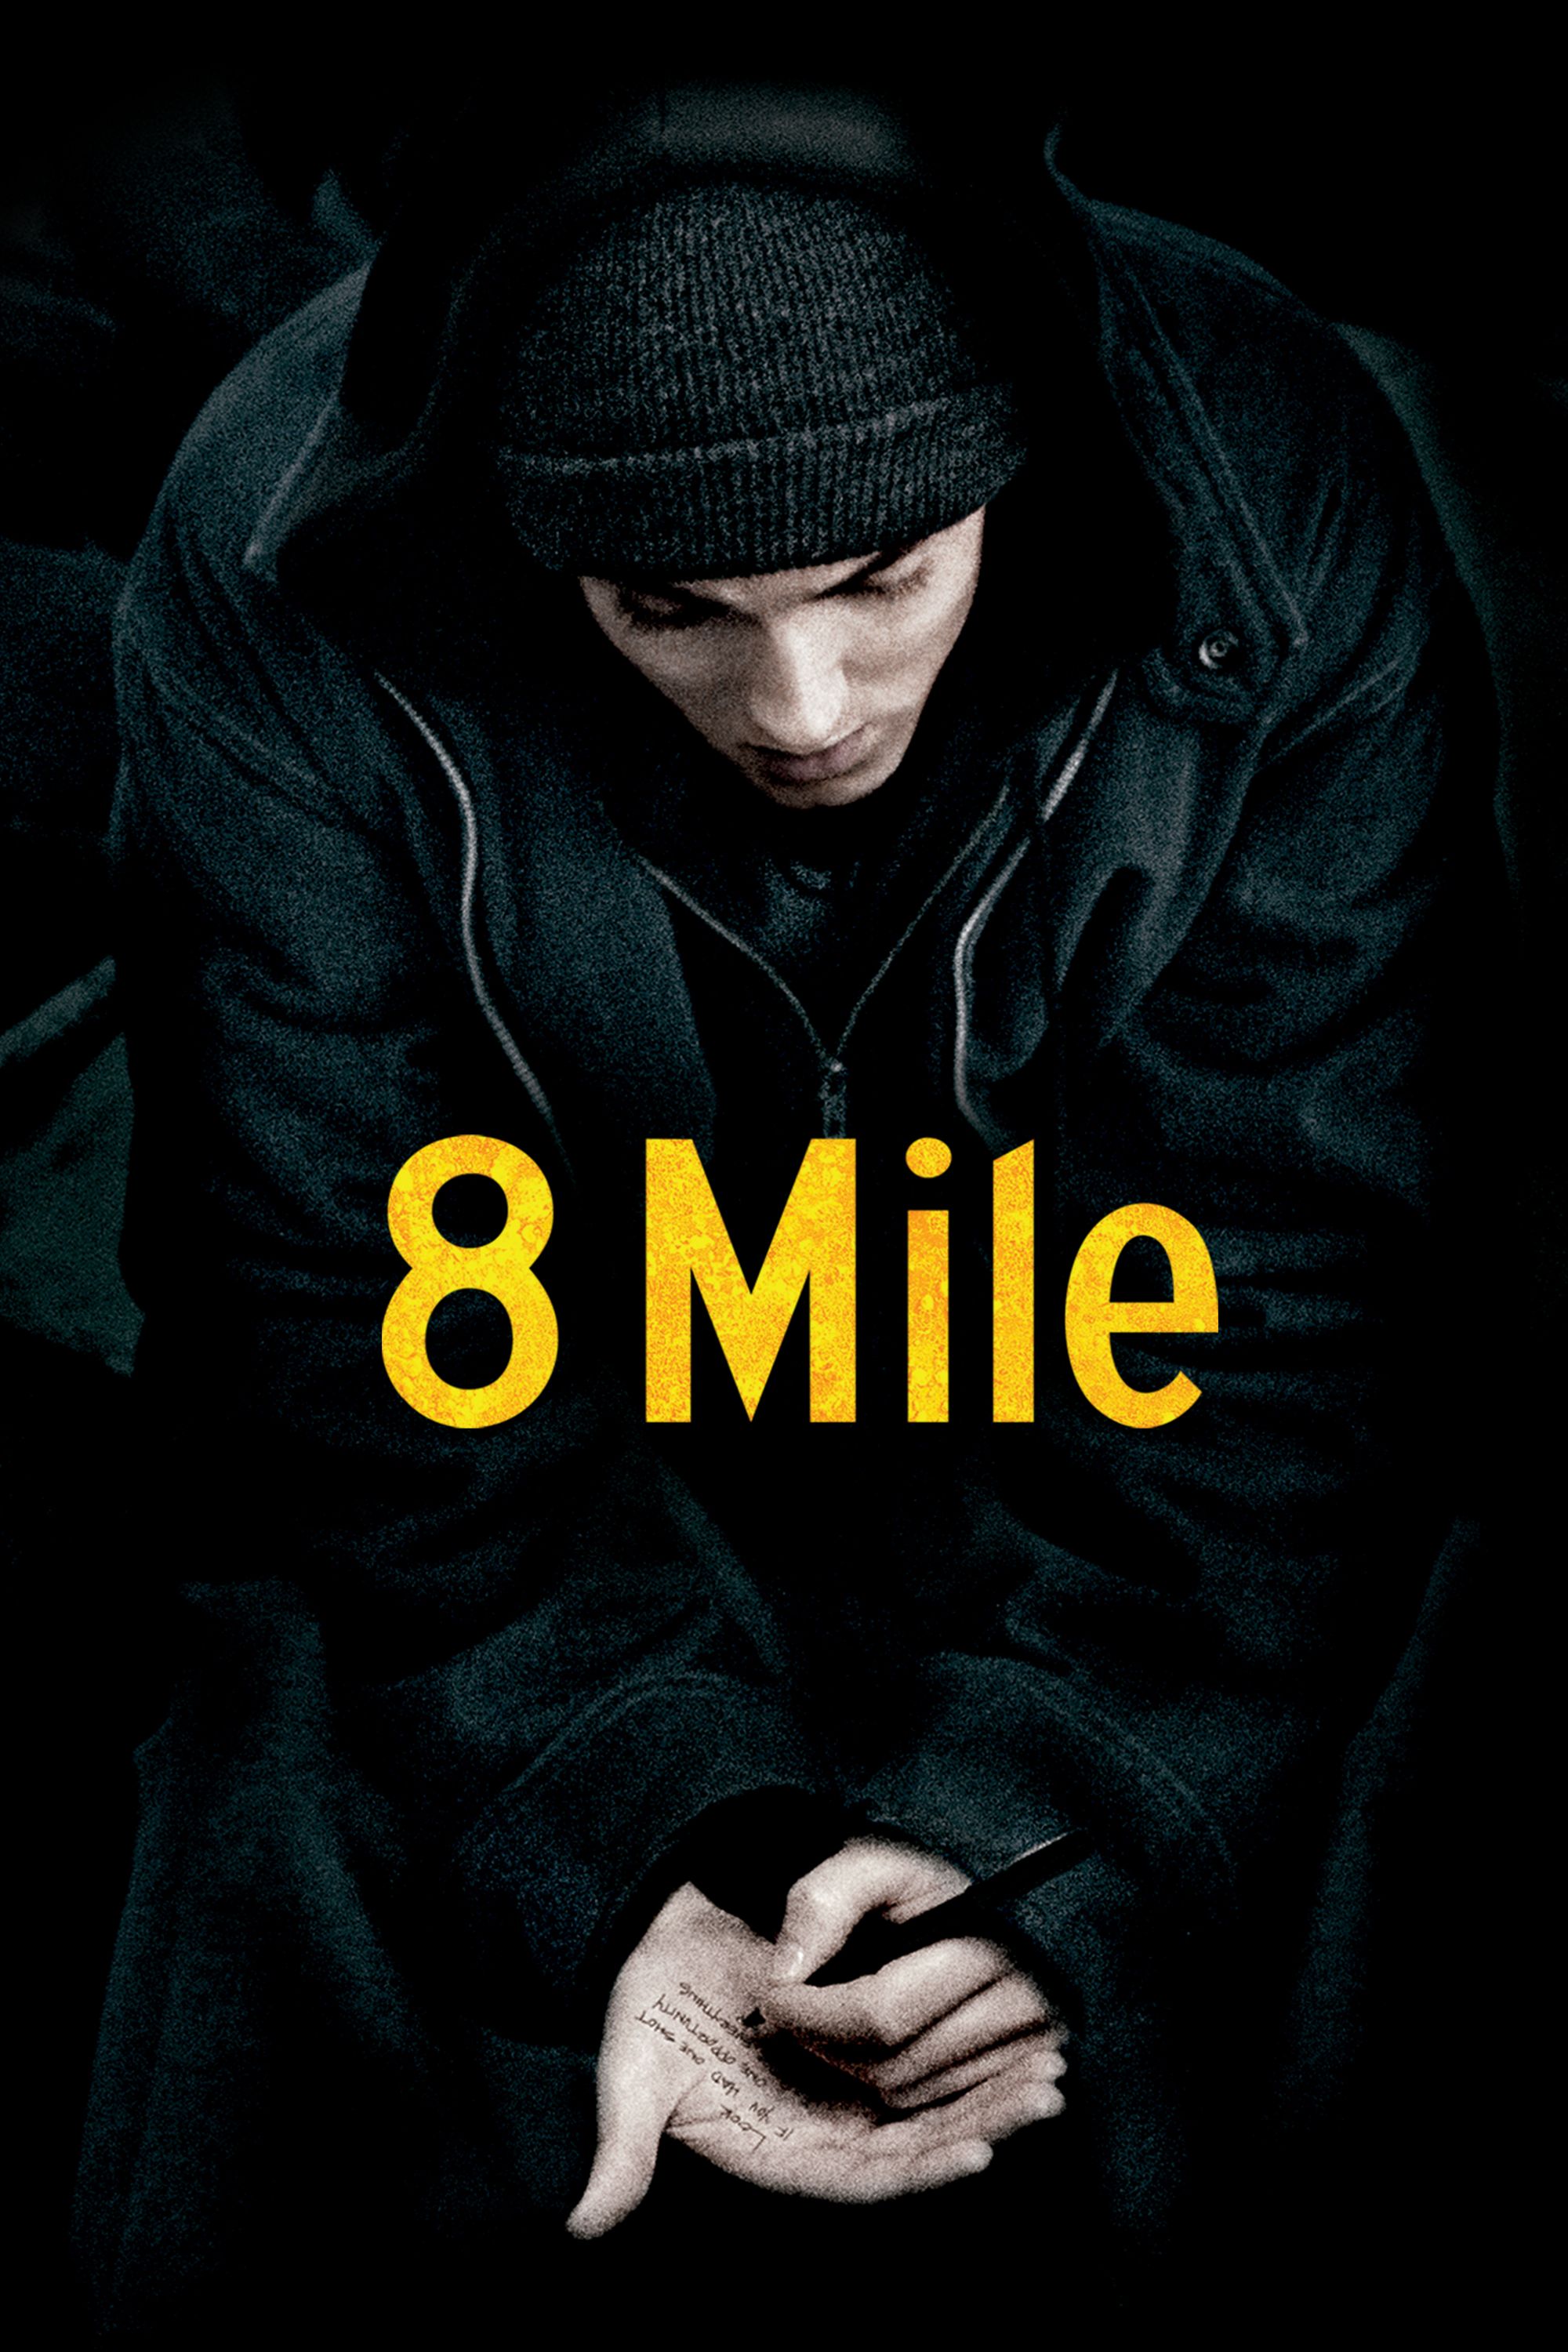 dan gustafsson recommends 8 mile full movie free pic